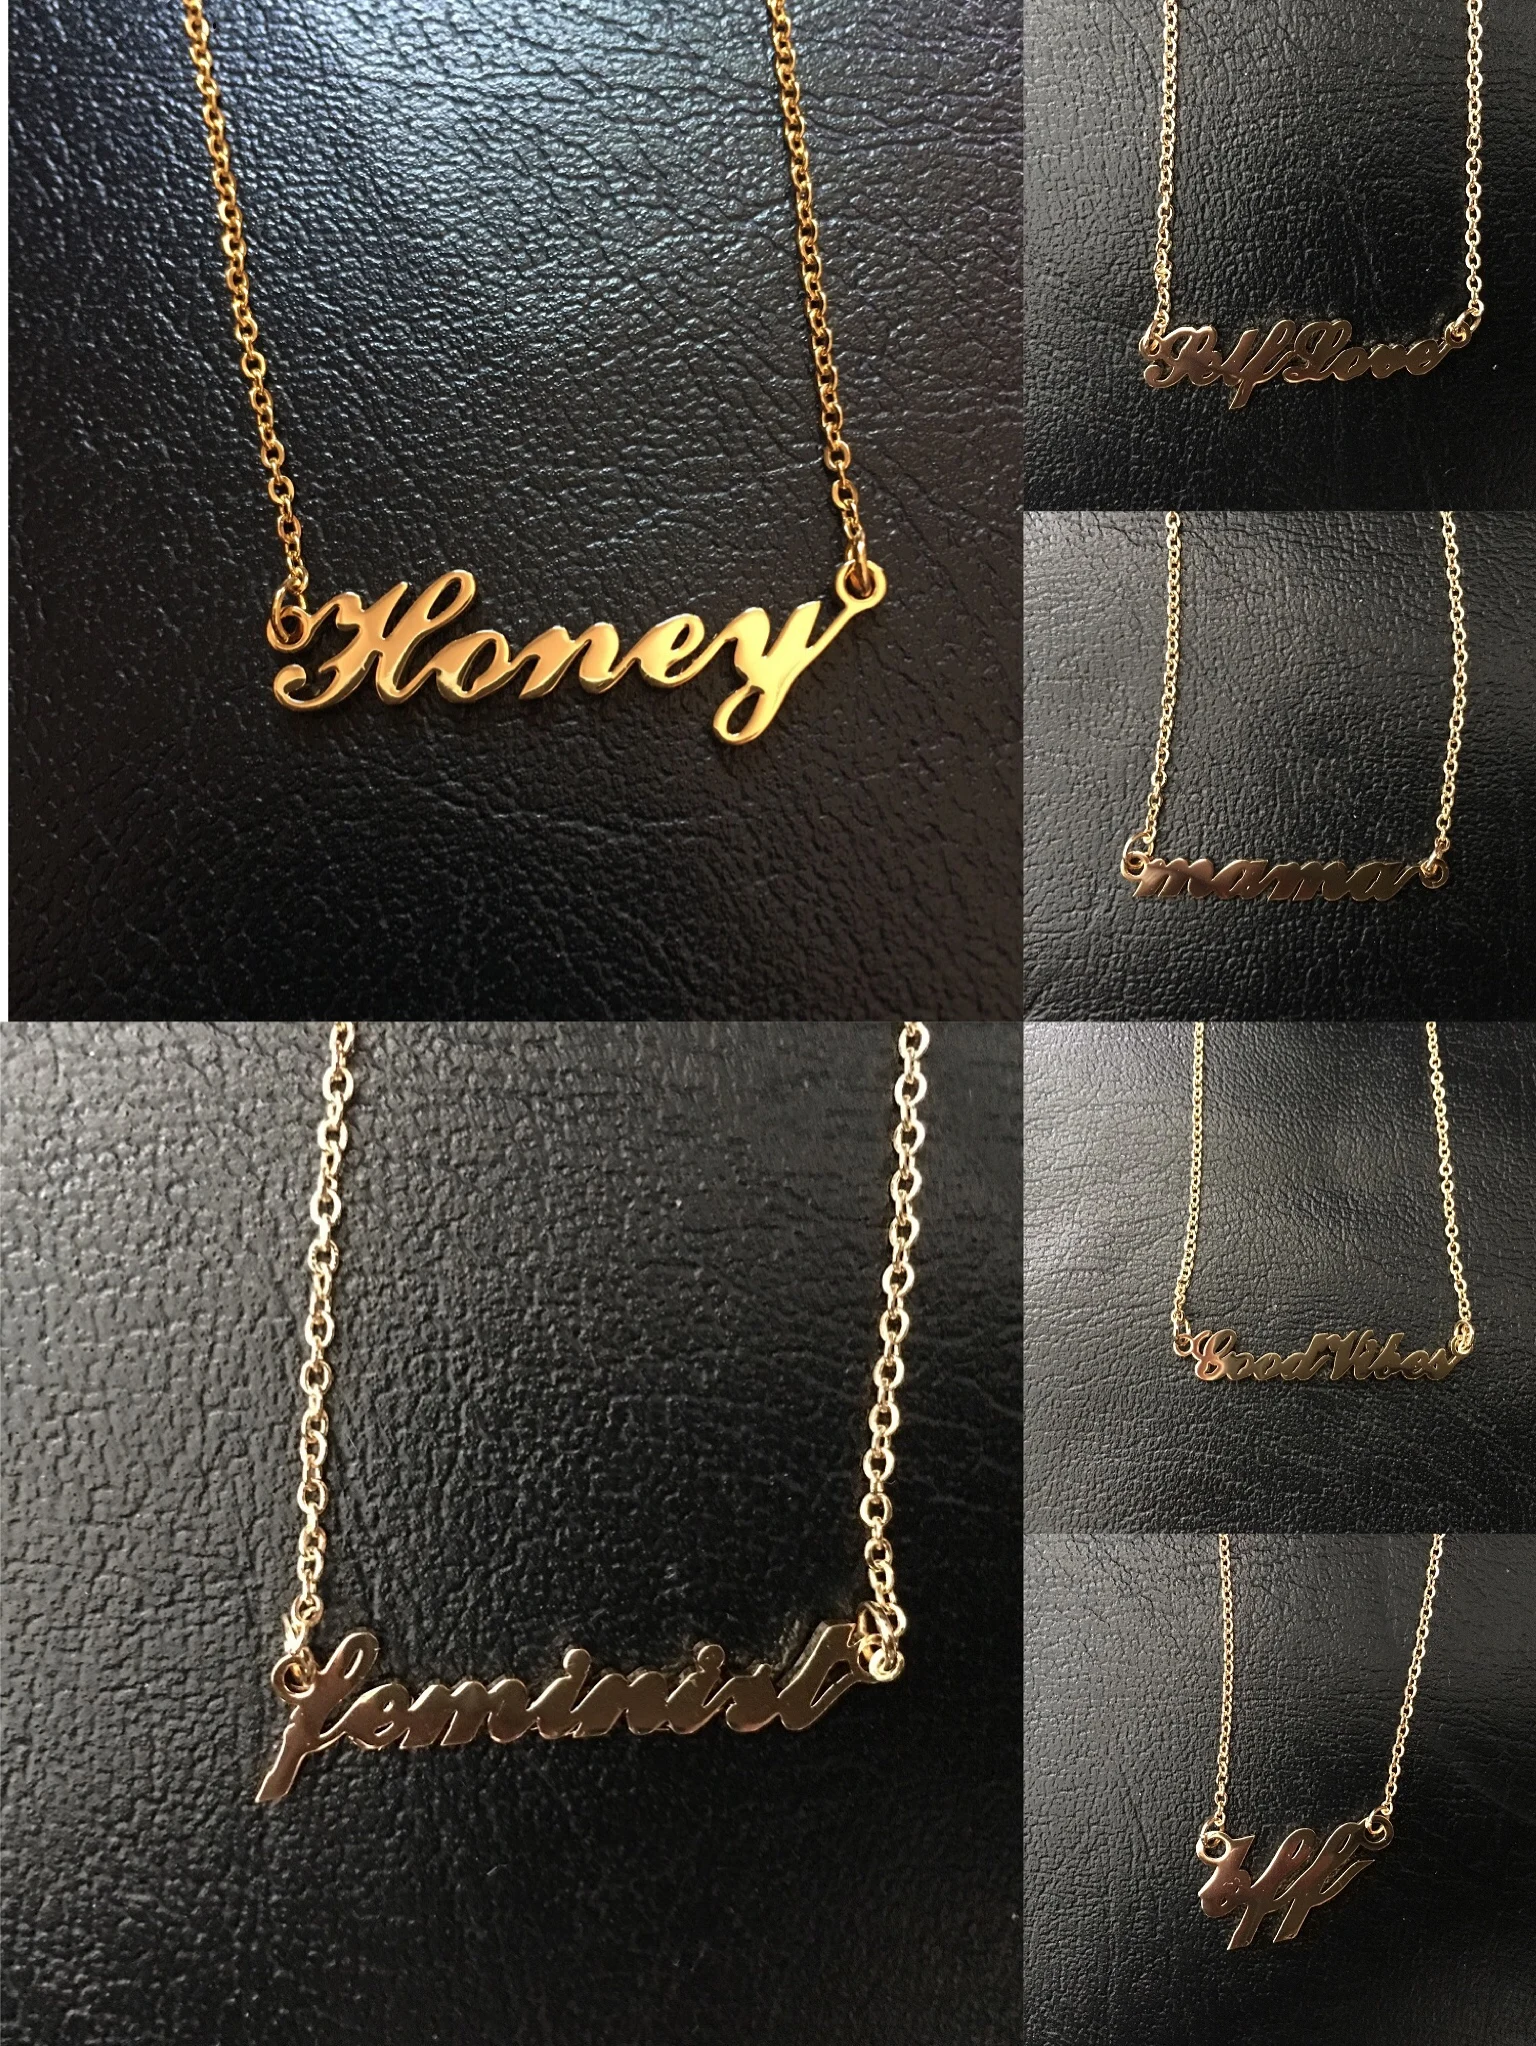 
18K Gold Plated Stainless Steel Custom Name Necklace Personalized Letter Necklace For Women 